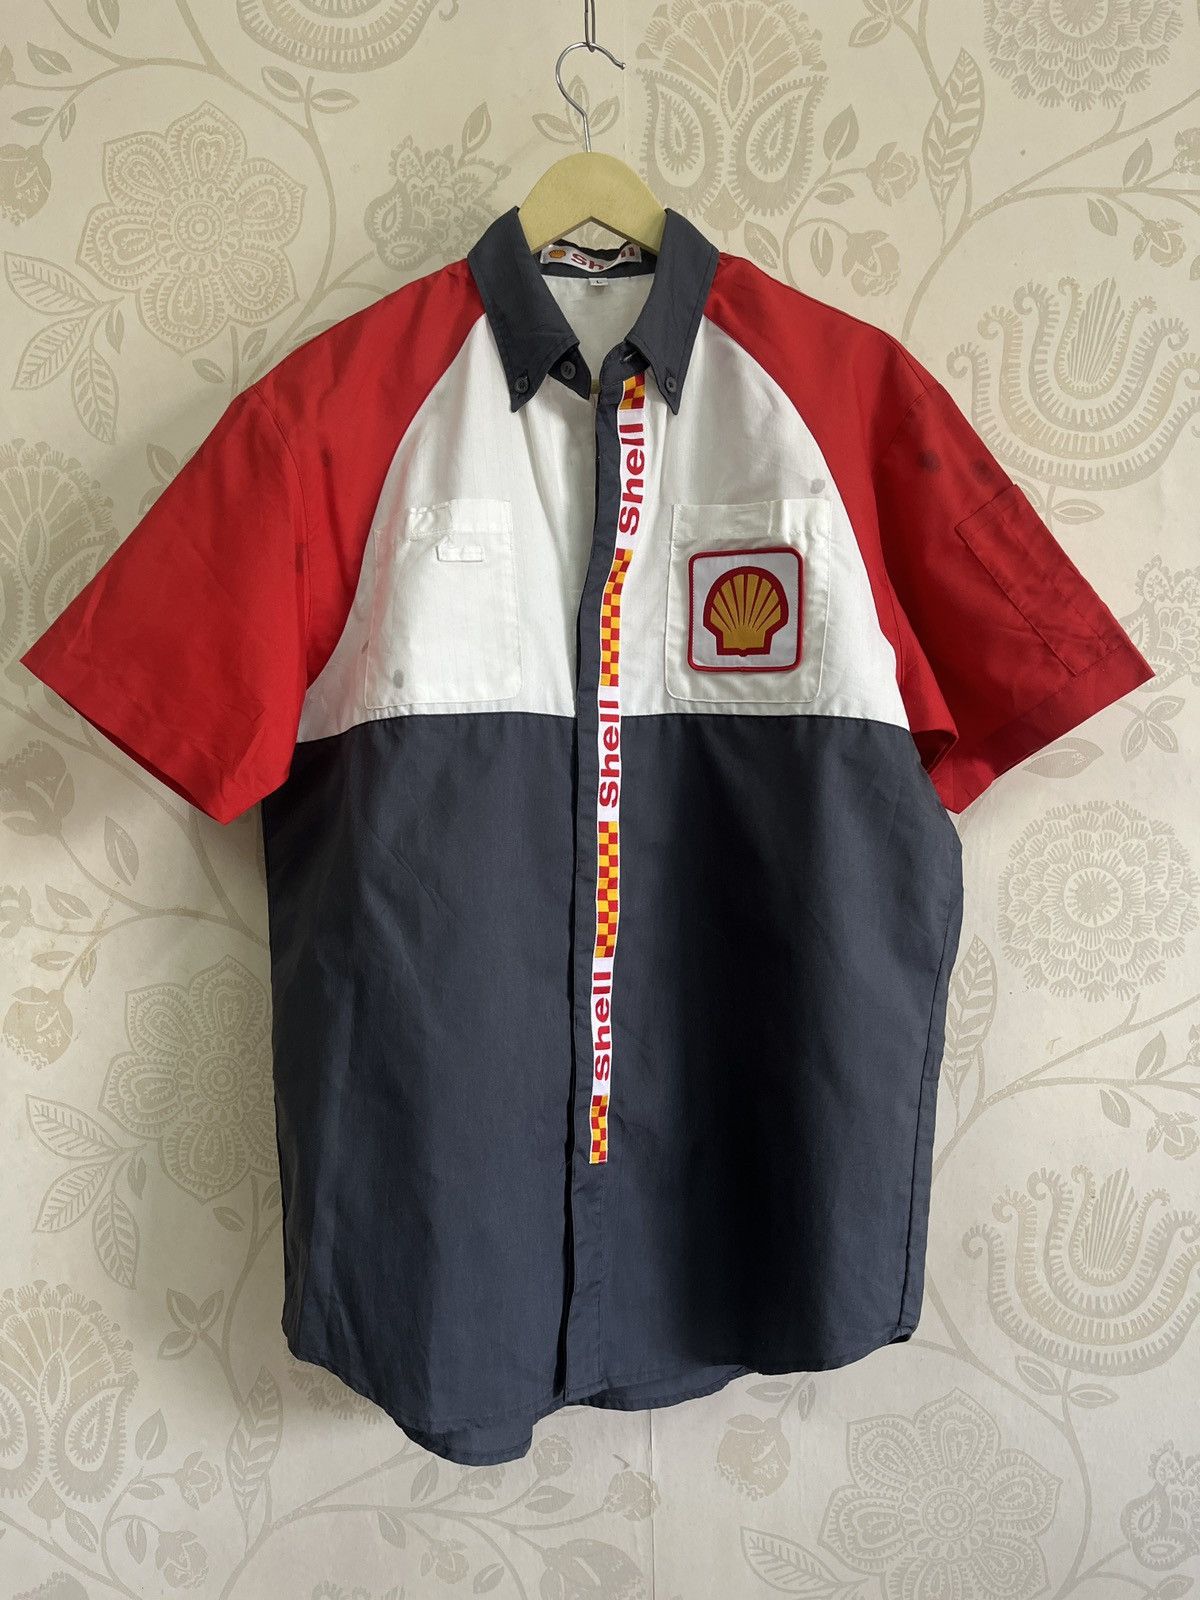 Vintage Shell Workers Uniform Shirts Japan - 3